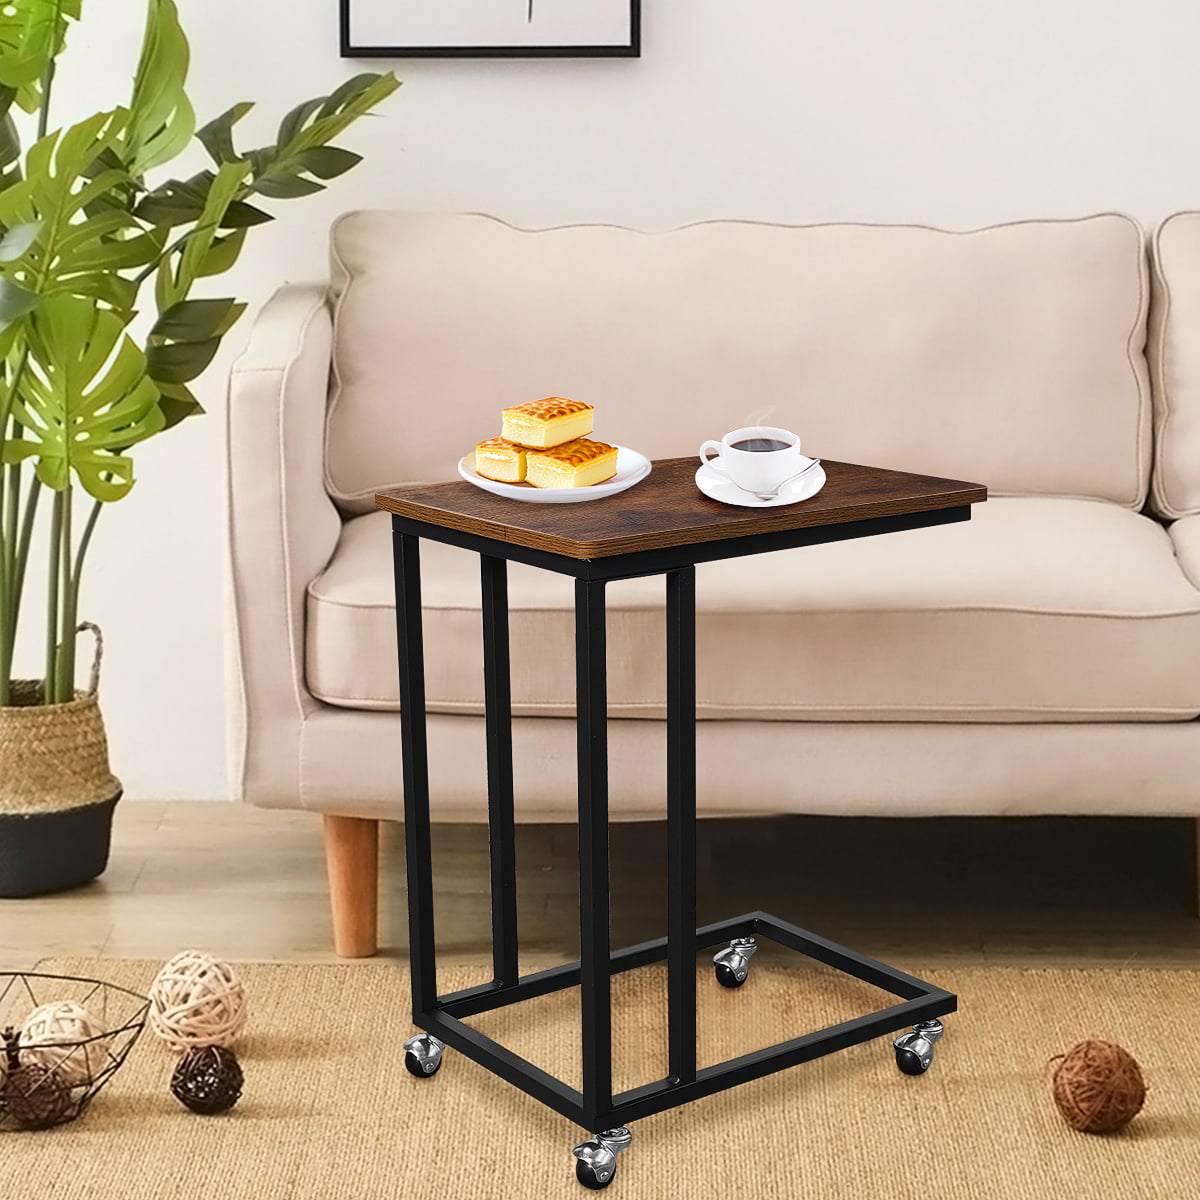 C-Shaped Side Sofa Snack Bed End Table Living Room Coffee Trays For Small Space 